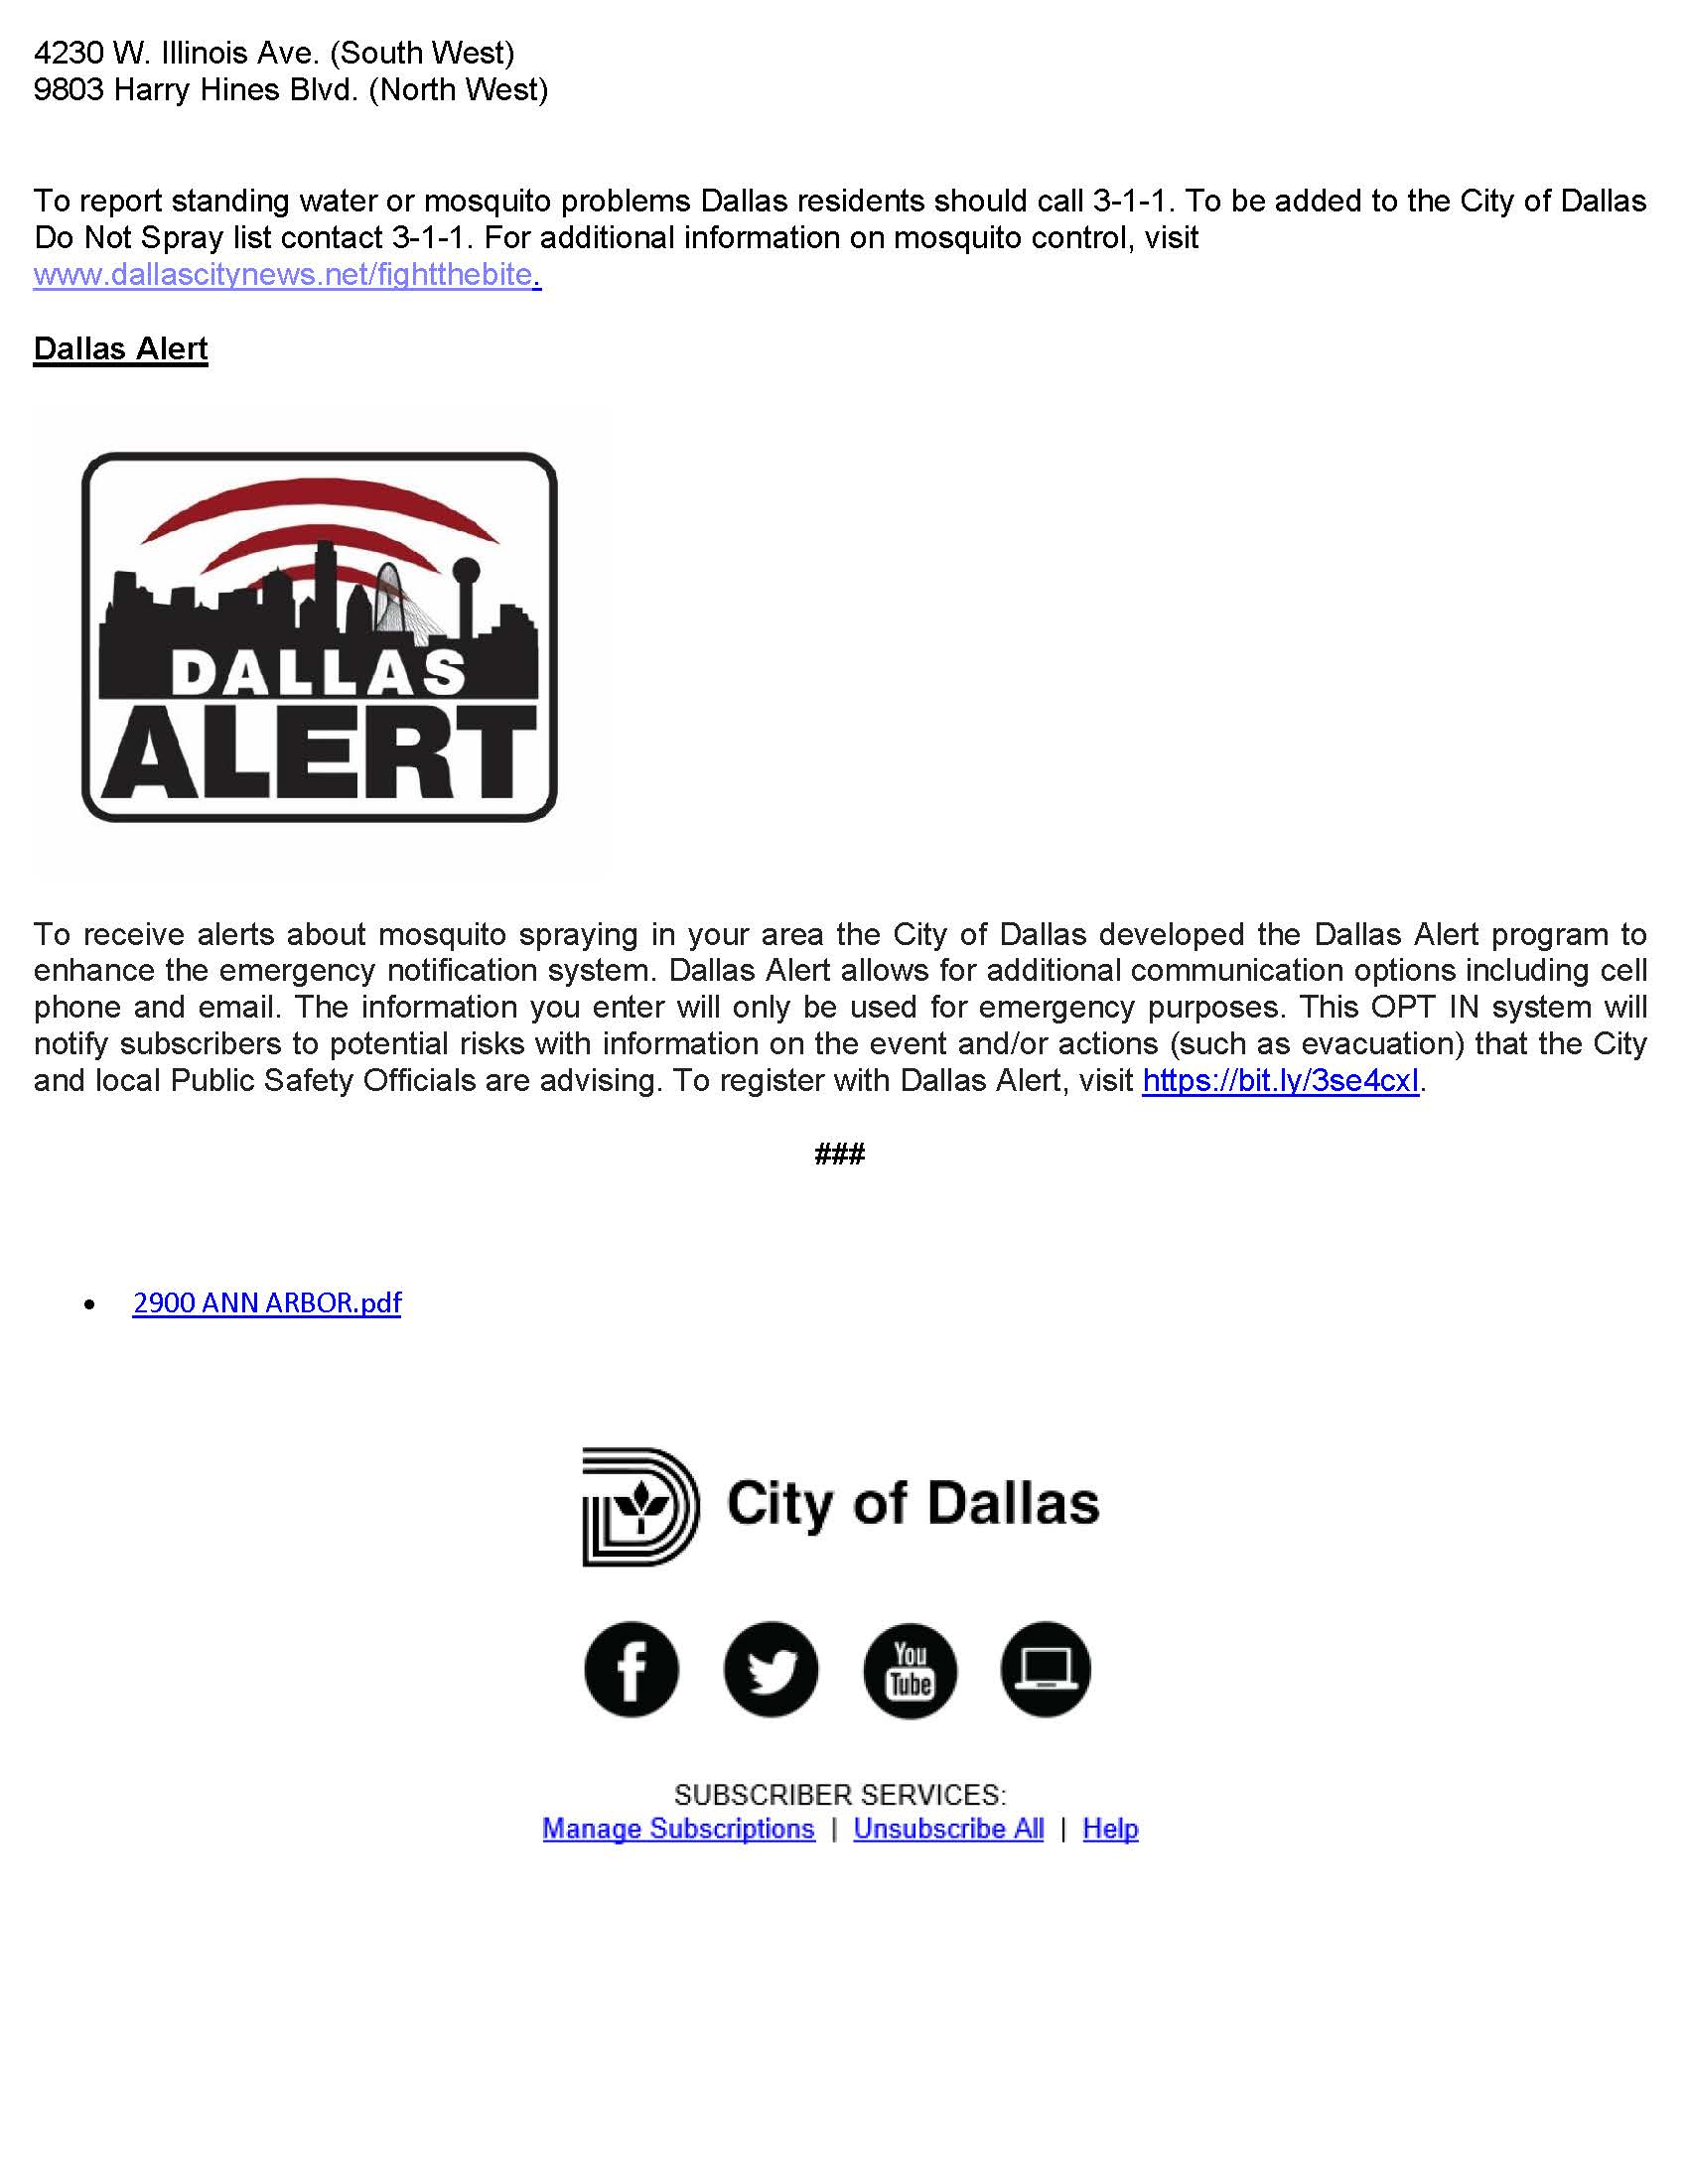 West Nile Virus in District 4 - FOR IMMEDIATE RELEASE_Page_2.jpg